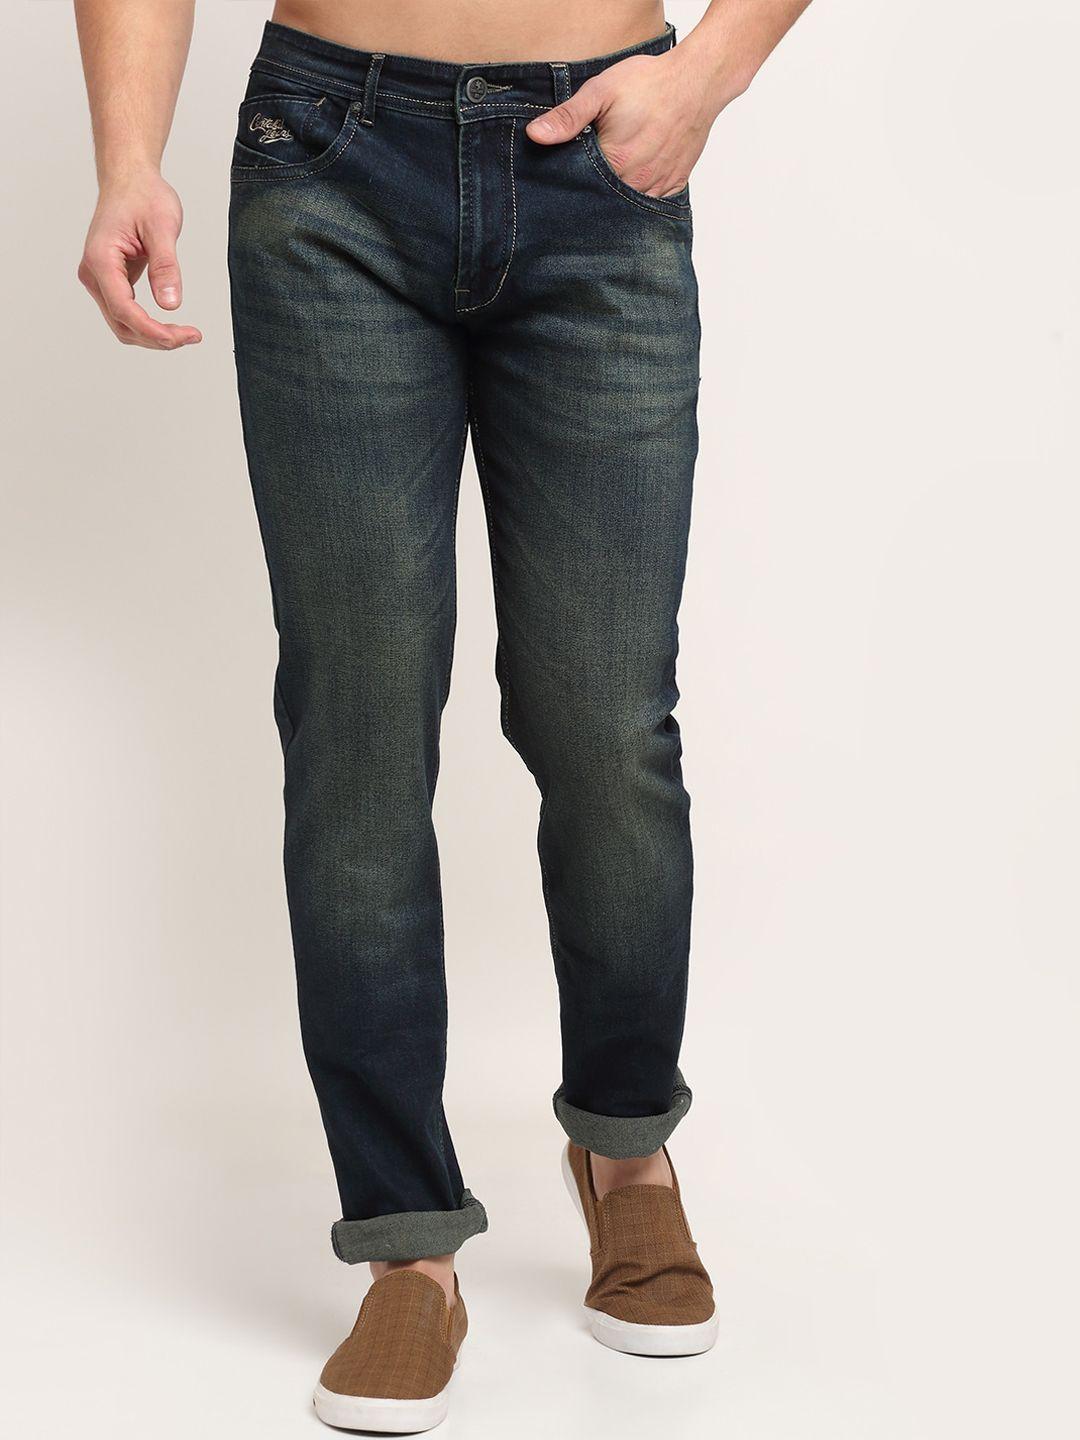 cantabil men blue & olive green faded jeans